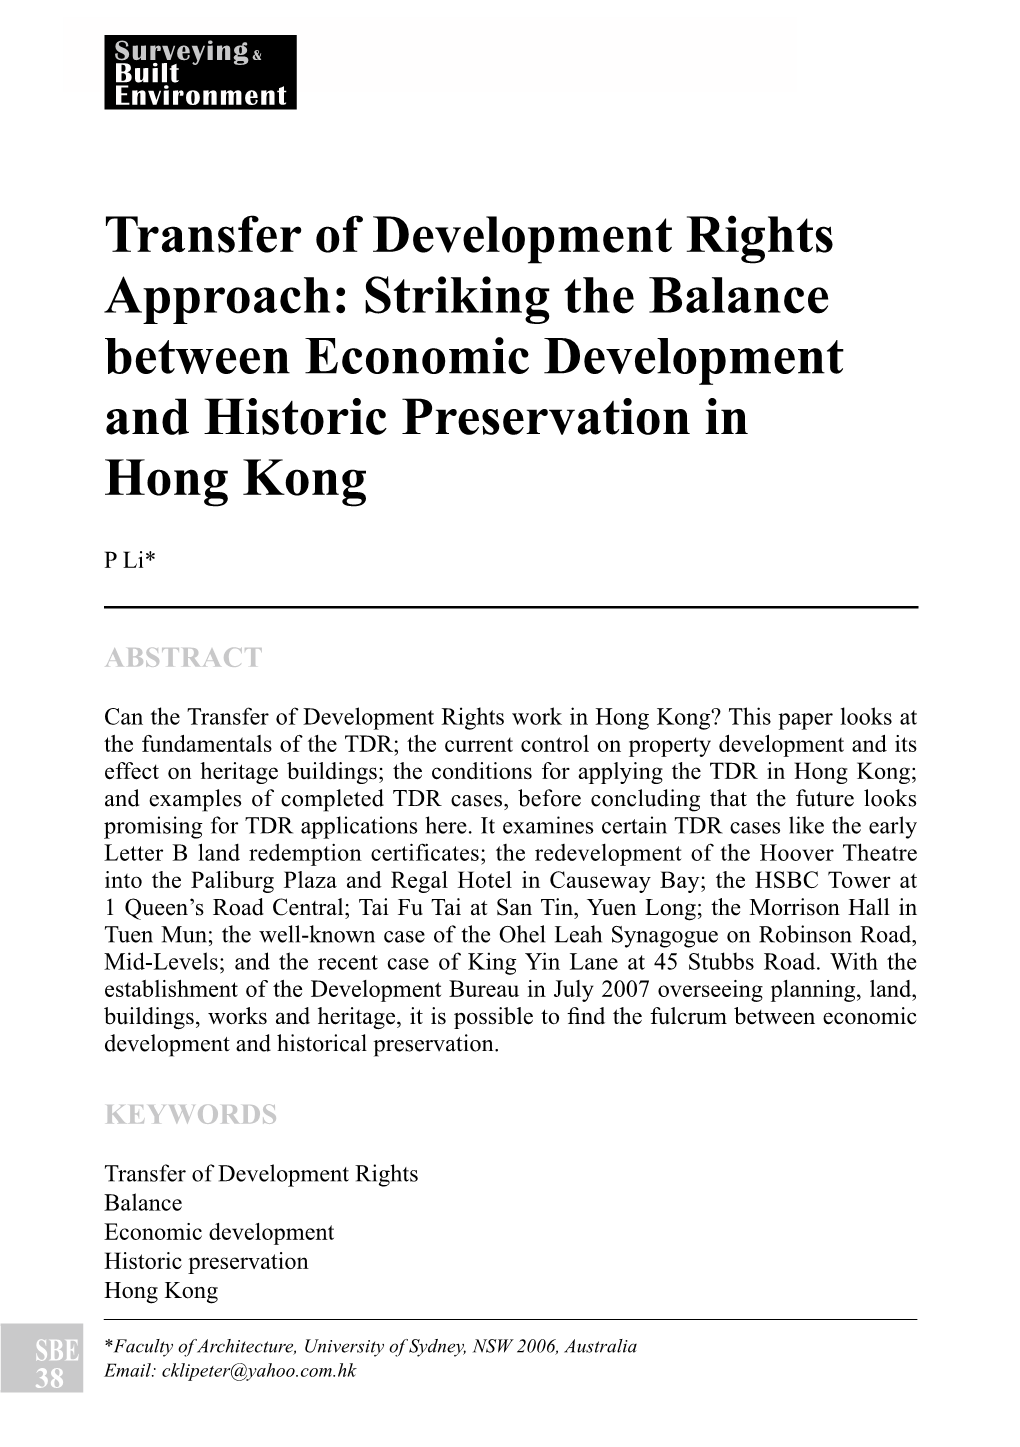 Transfer of Development Rights Approach